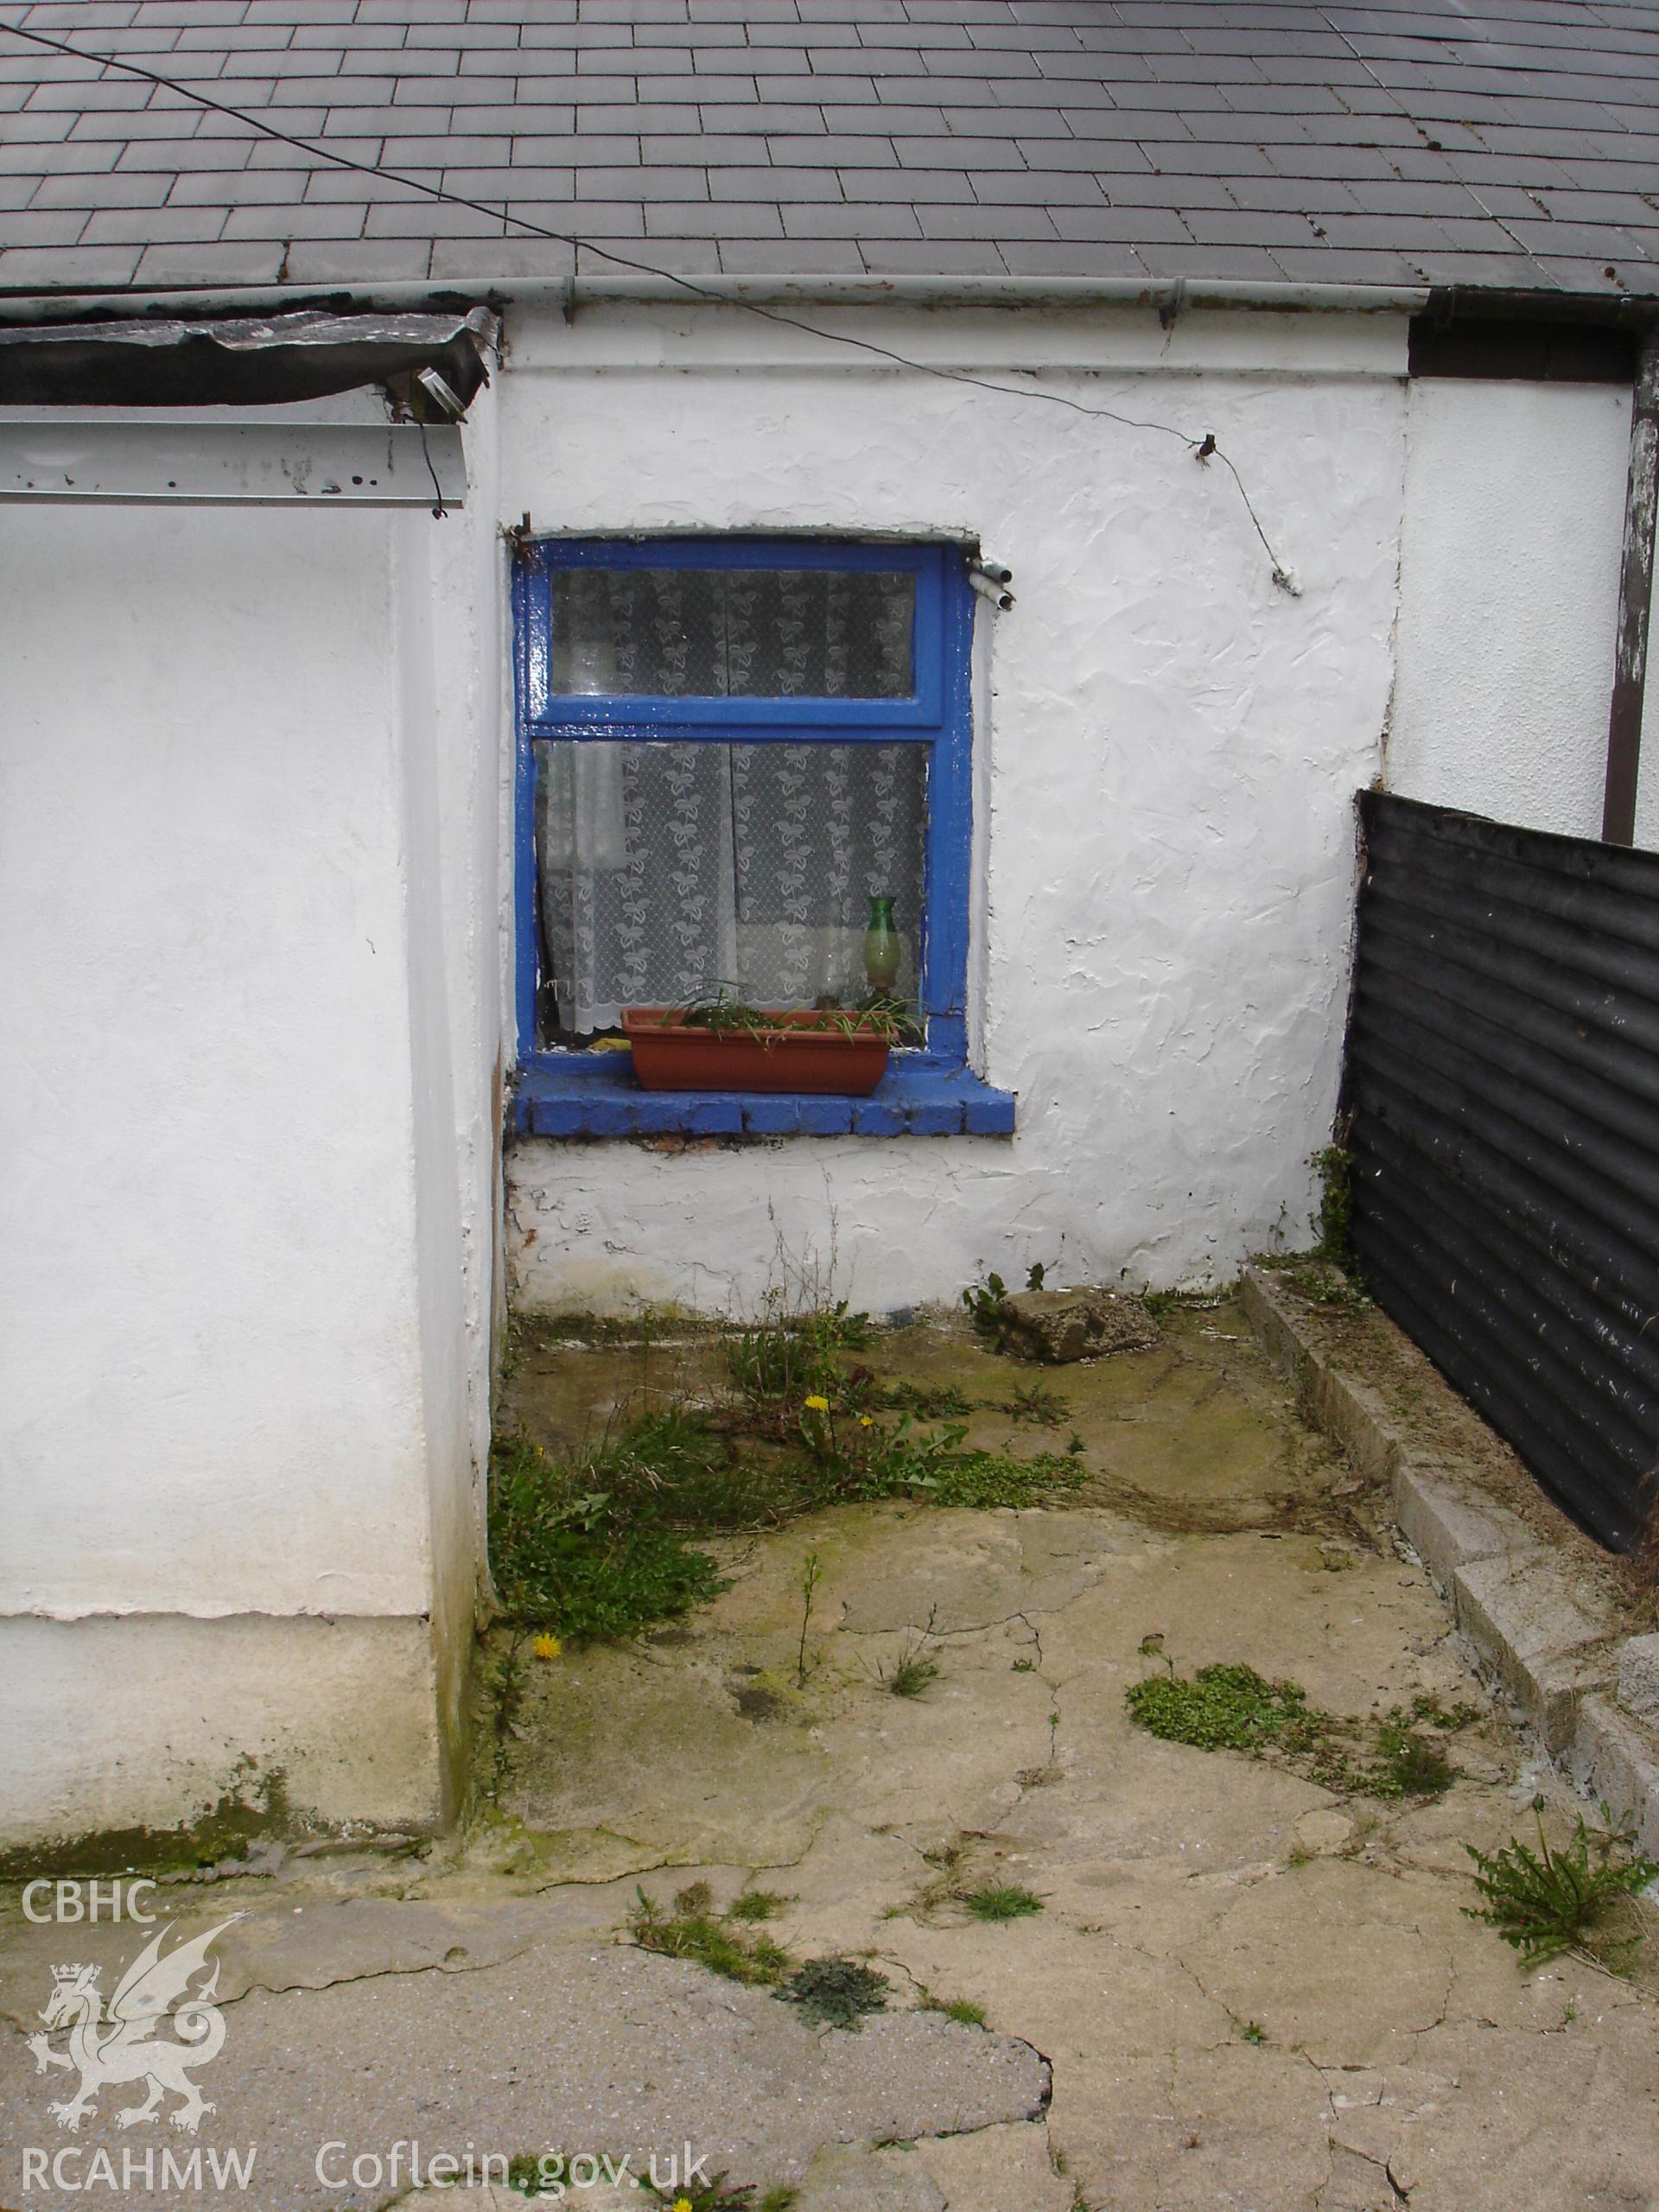 Colour digital photograph showing exterior view (outbuildings) of a cottage at Gelli Houses, Cymmer.